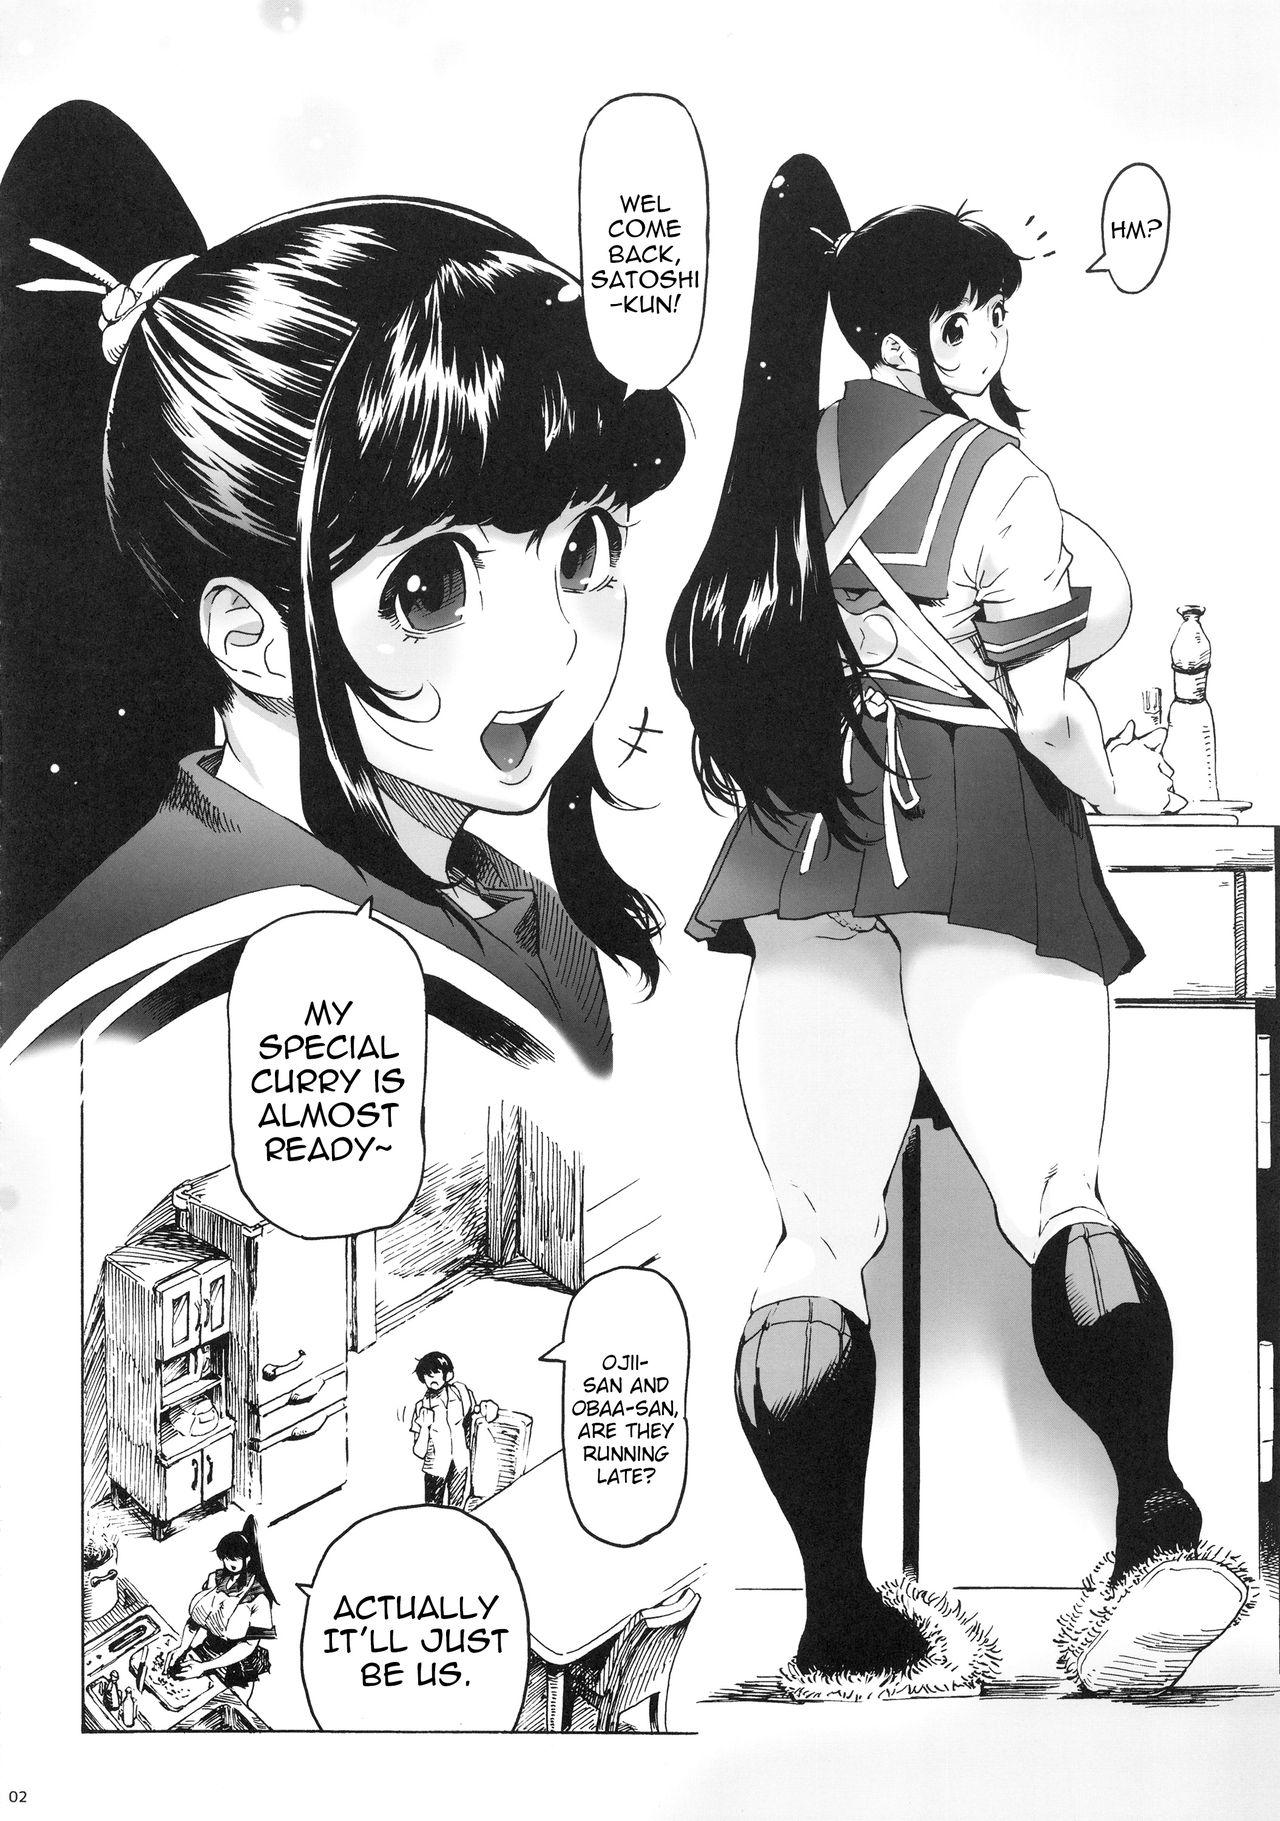 [Coochy-Coo (Bonten)] My Childhood friend is a JK Ponytailed Girl | With Aki-Nee 2 | AkiAss 3 | Trilogy [English] {Stopittarpit} page 3 full